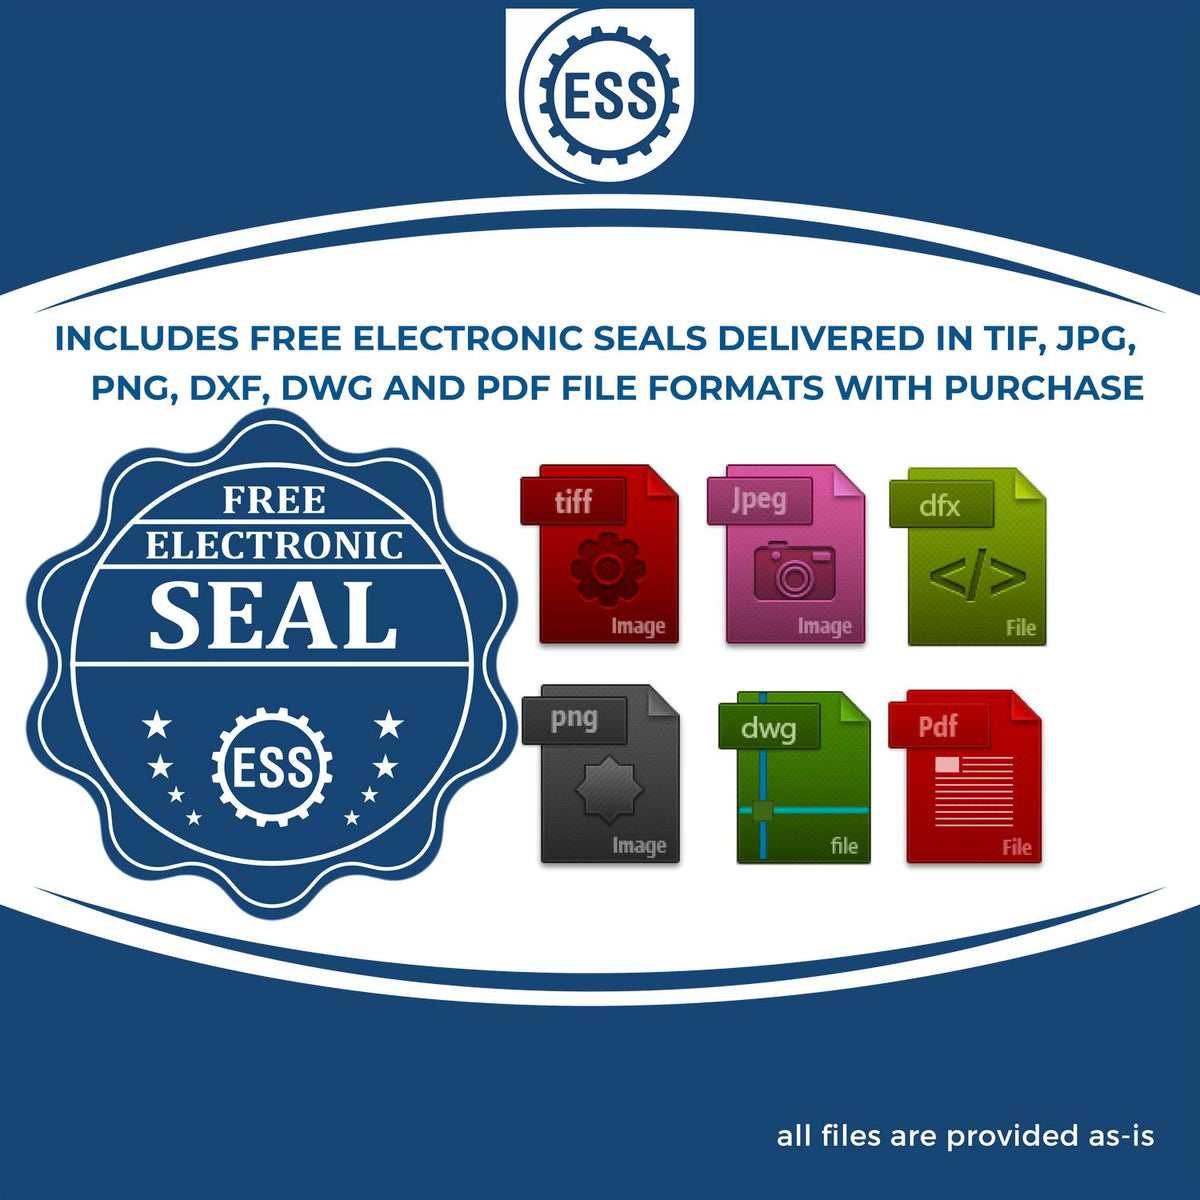 An infographic for the free electronic seal for the State of West Virginia Soft Land Surveyor Embossing Seal illustrating the different file type icons such as DXF, DWG, TIF, JPG and PNG.